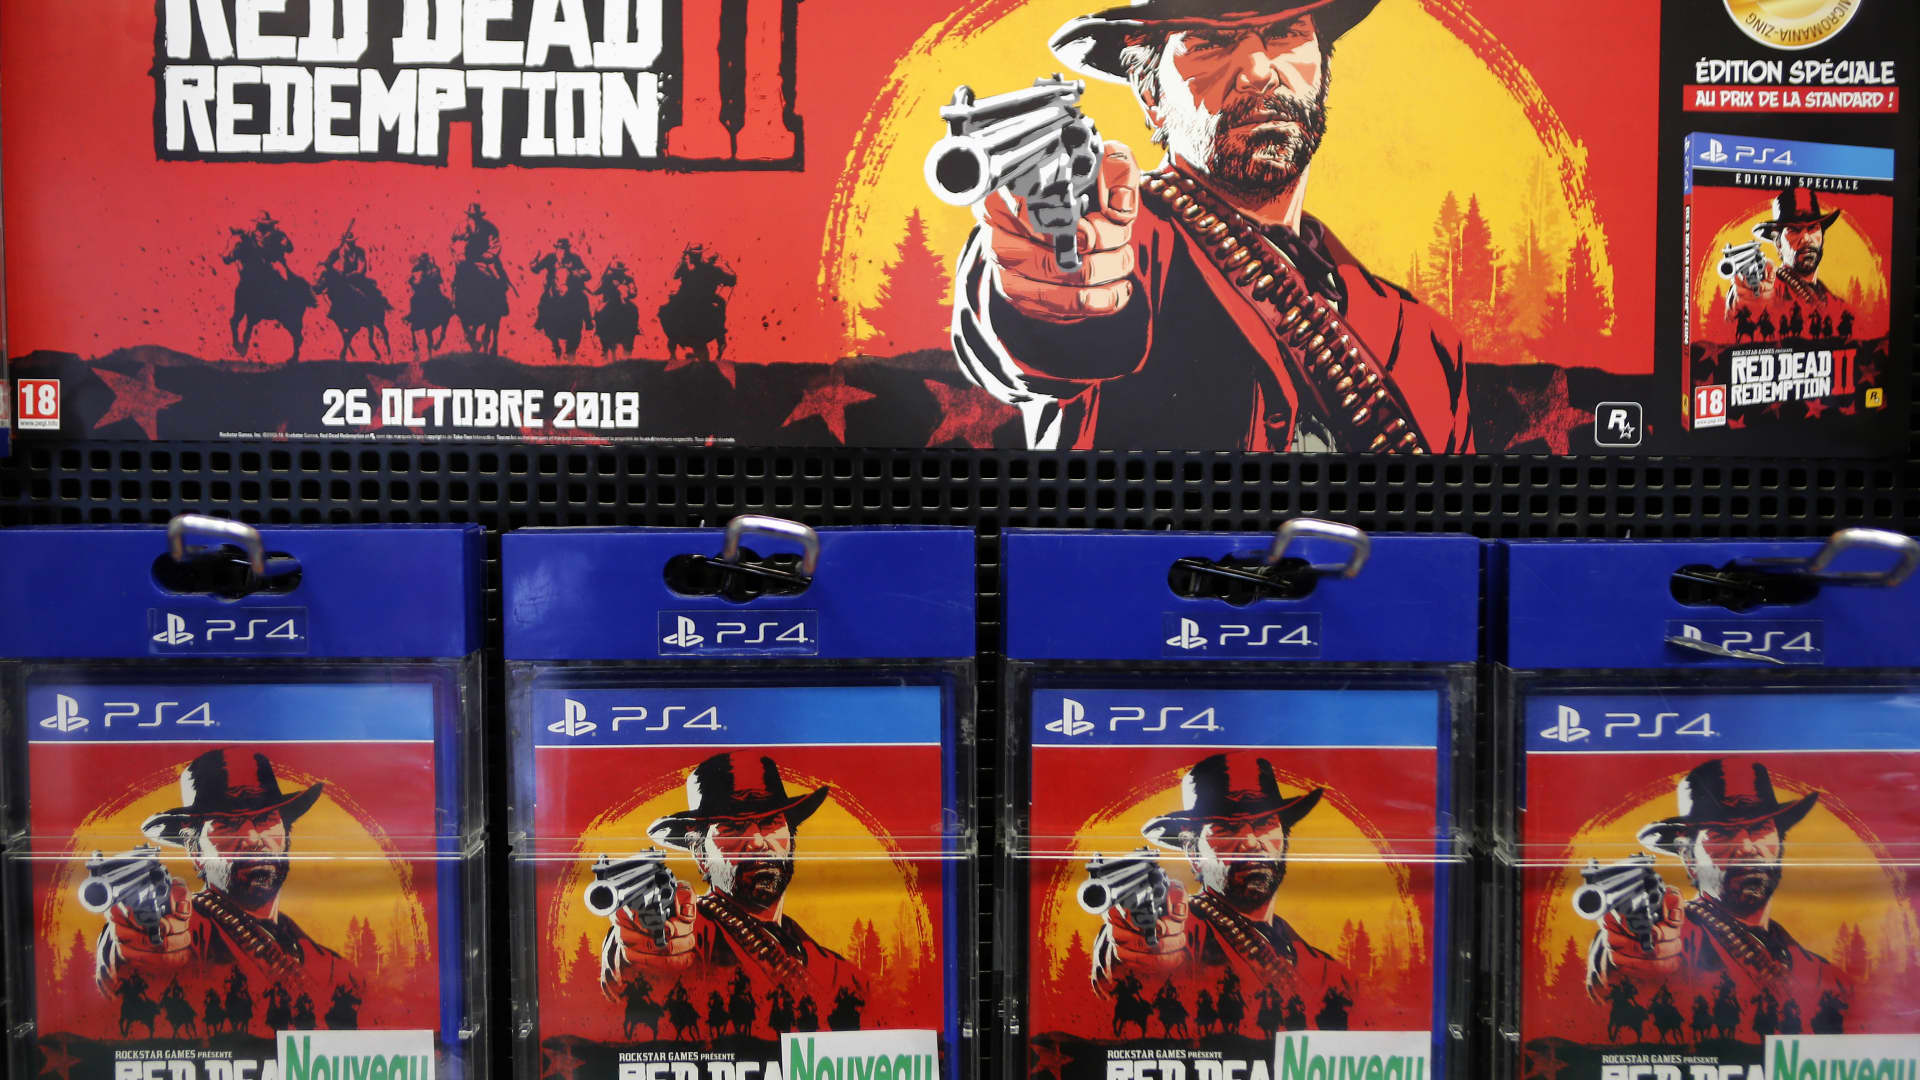 Rockstar's Red Dead Redemption smashes opening weekend records